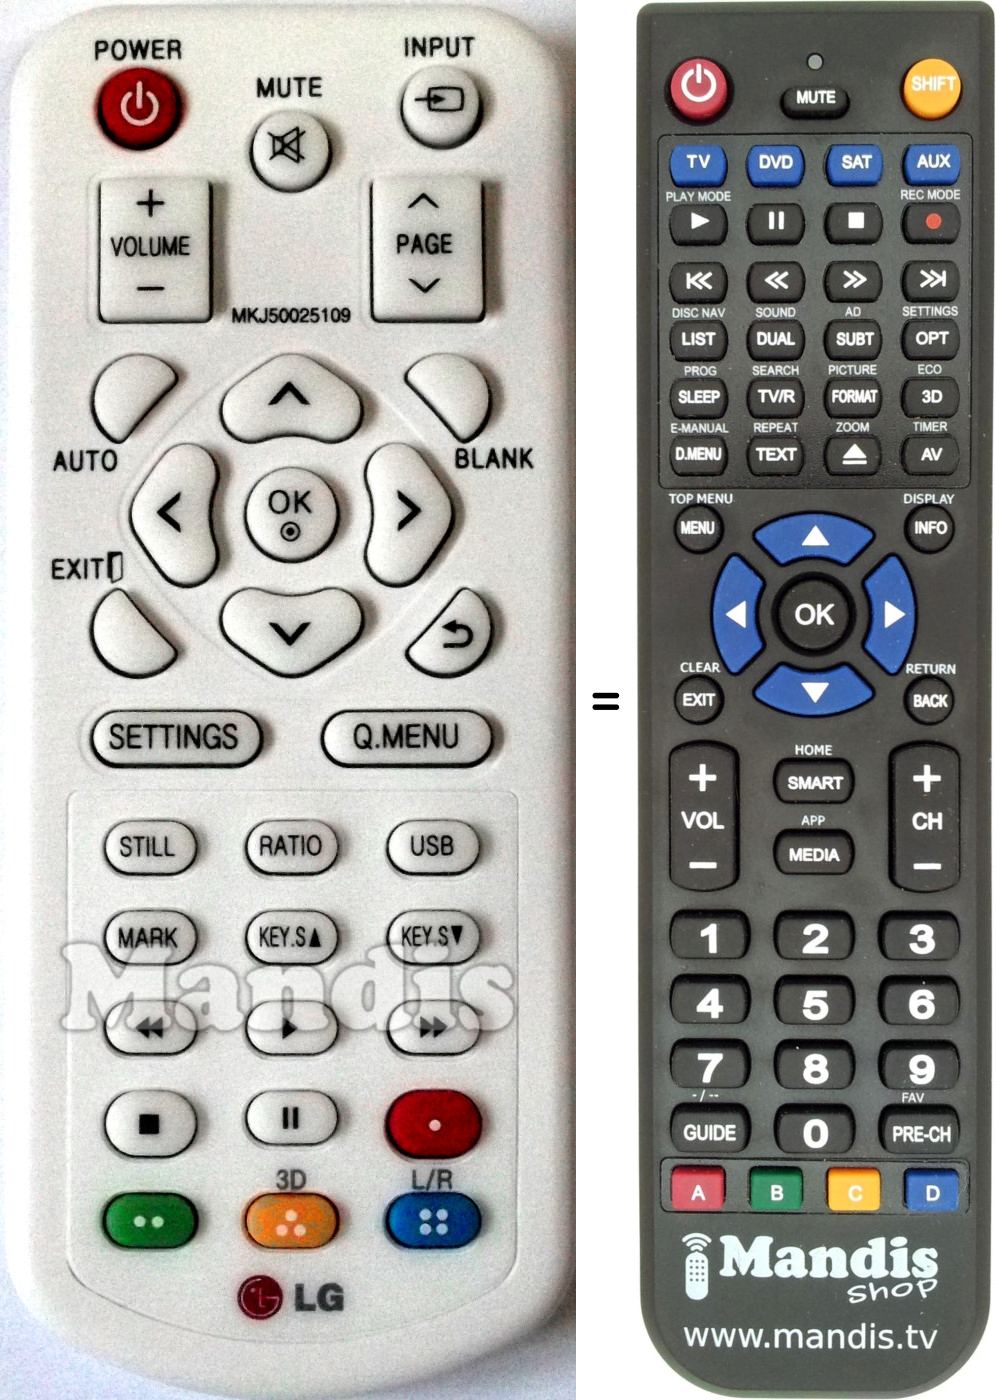 PW800 OEM LG Remote Control Originally Shipped With 